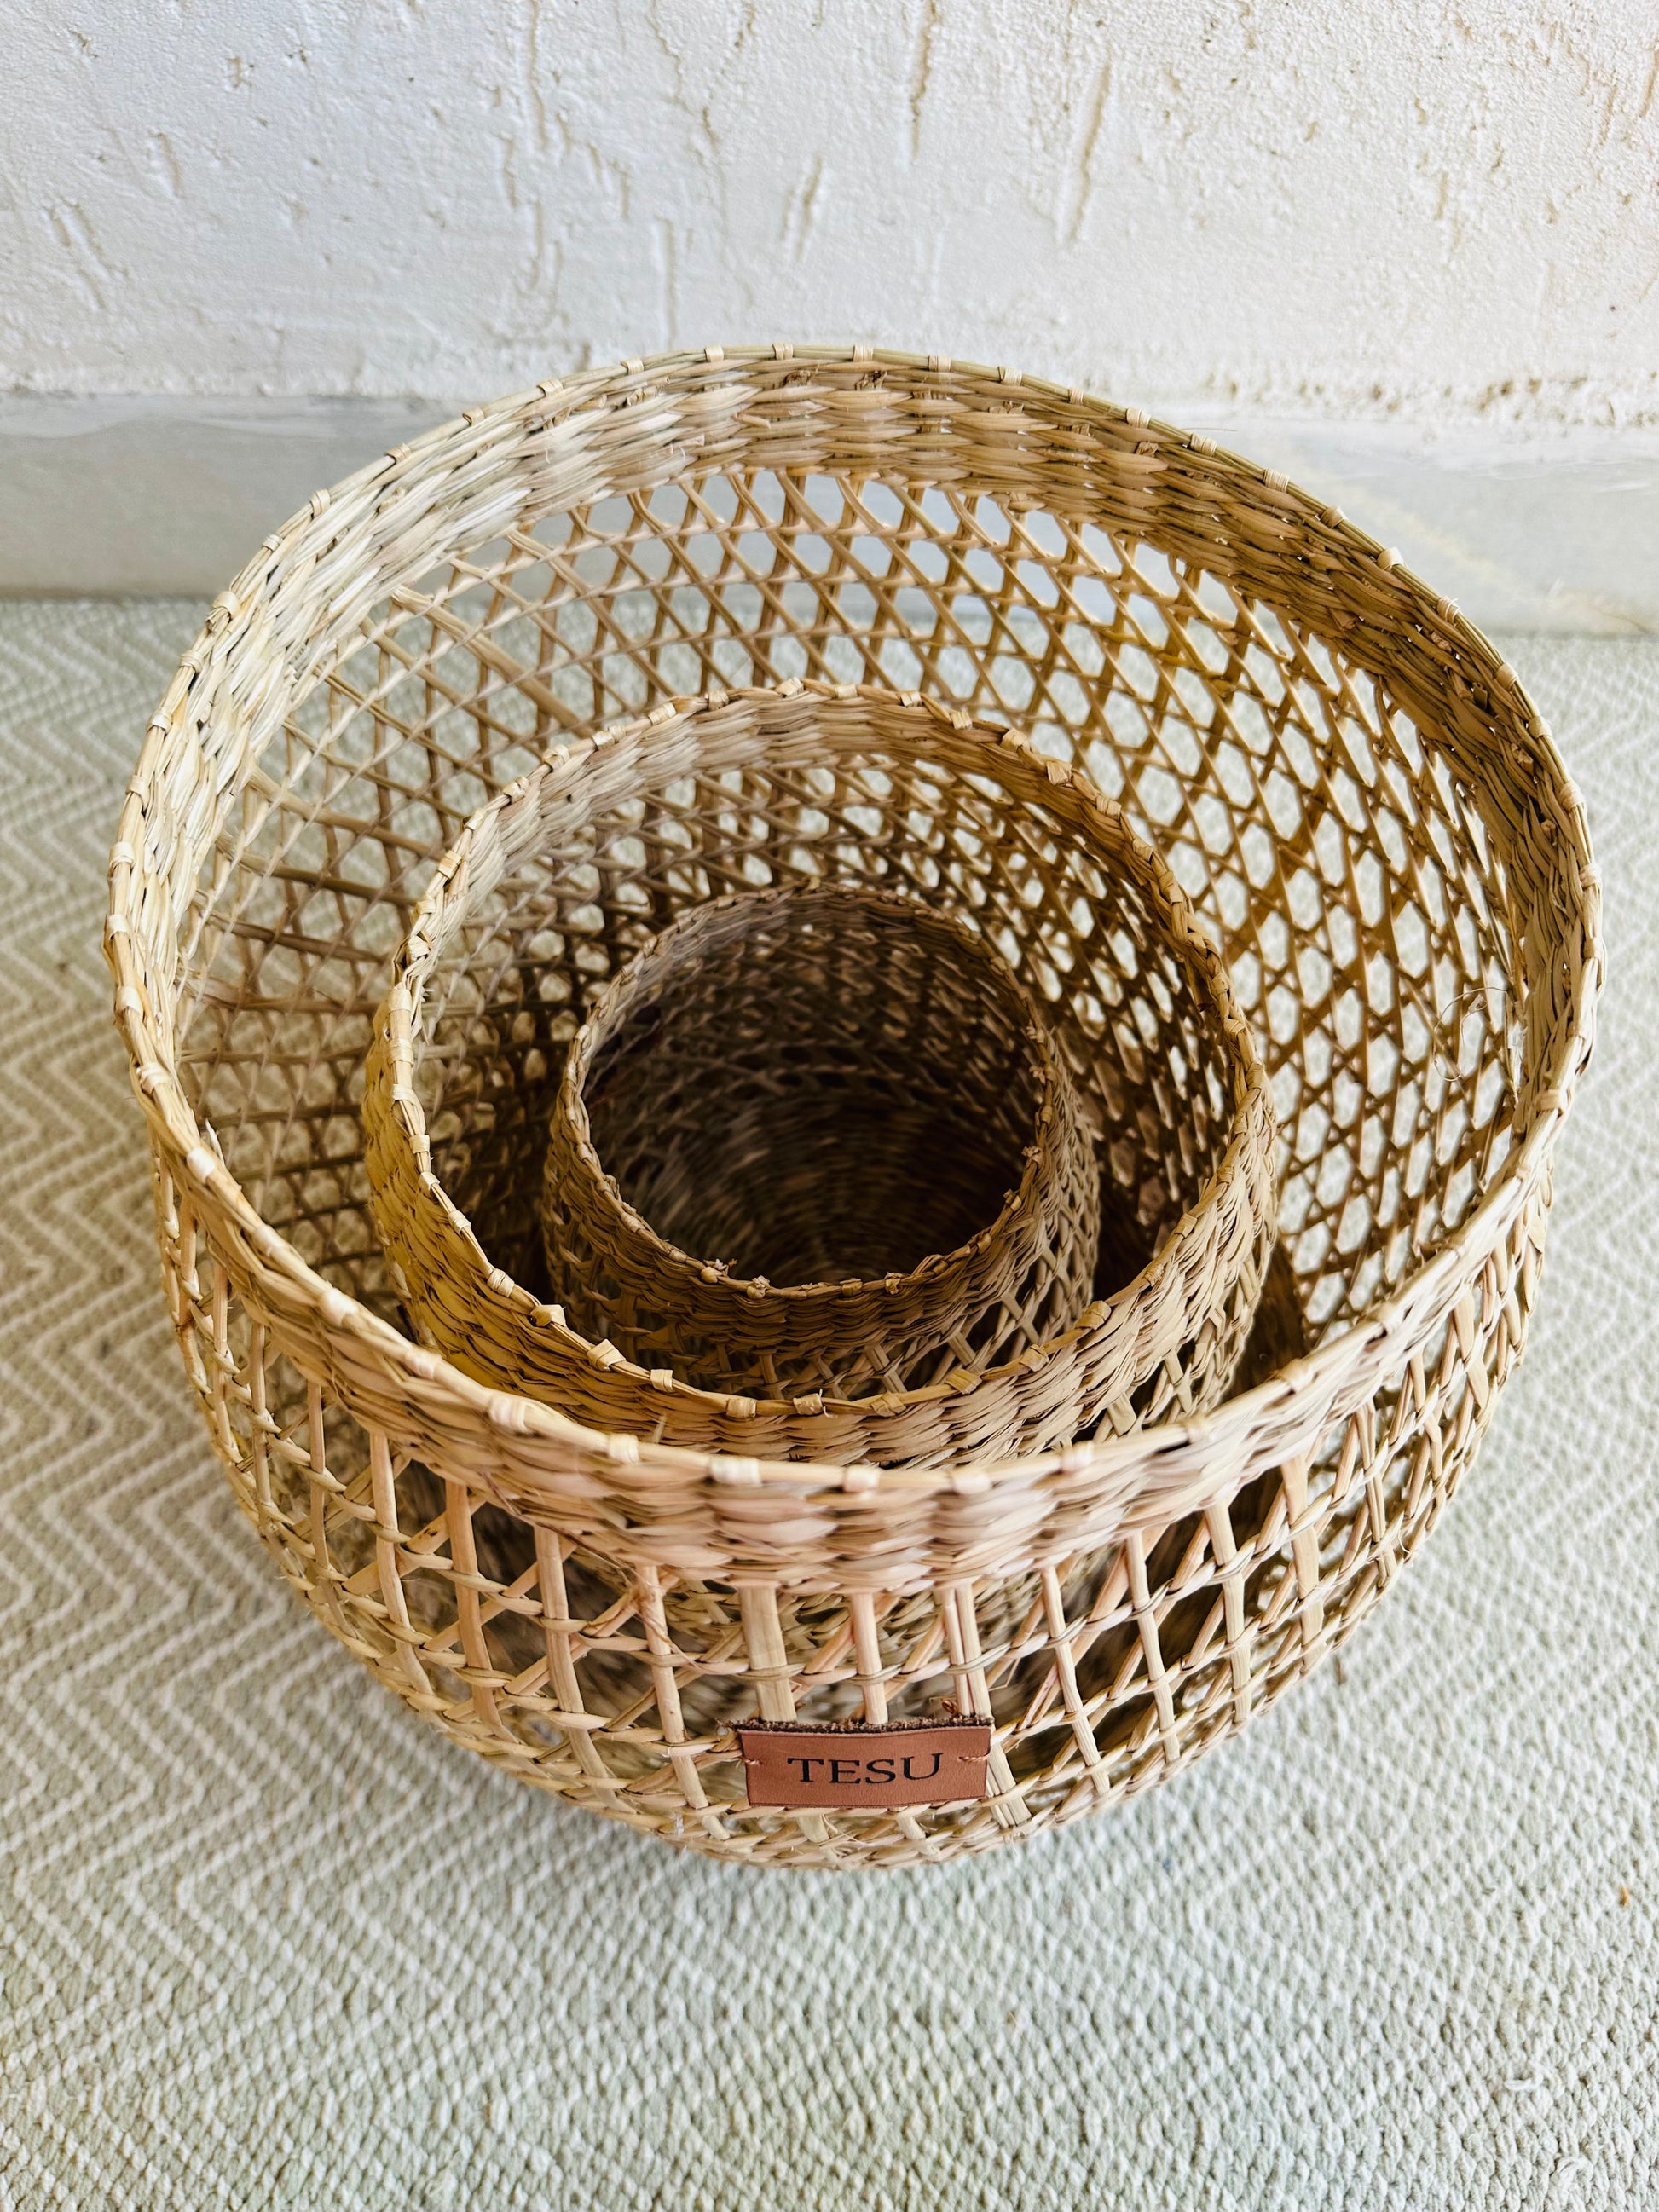 Enhance your Dream Home with our curated selection of premium Home Décor items. Seagrass Plant Holder are perfect for decorating your home, living room decor, bedroom interior touches, beautiful cover pots and much more. Hand-woven by our artisans from sustainable Sea grass these storage baskets are great for storing and have high aesthetic appeal. TESU